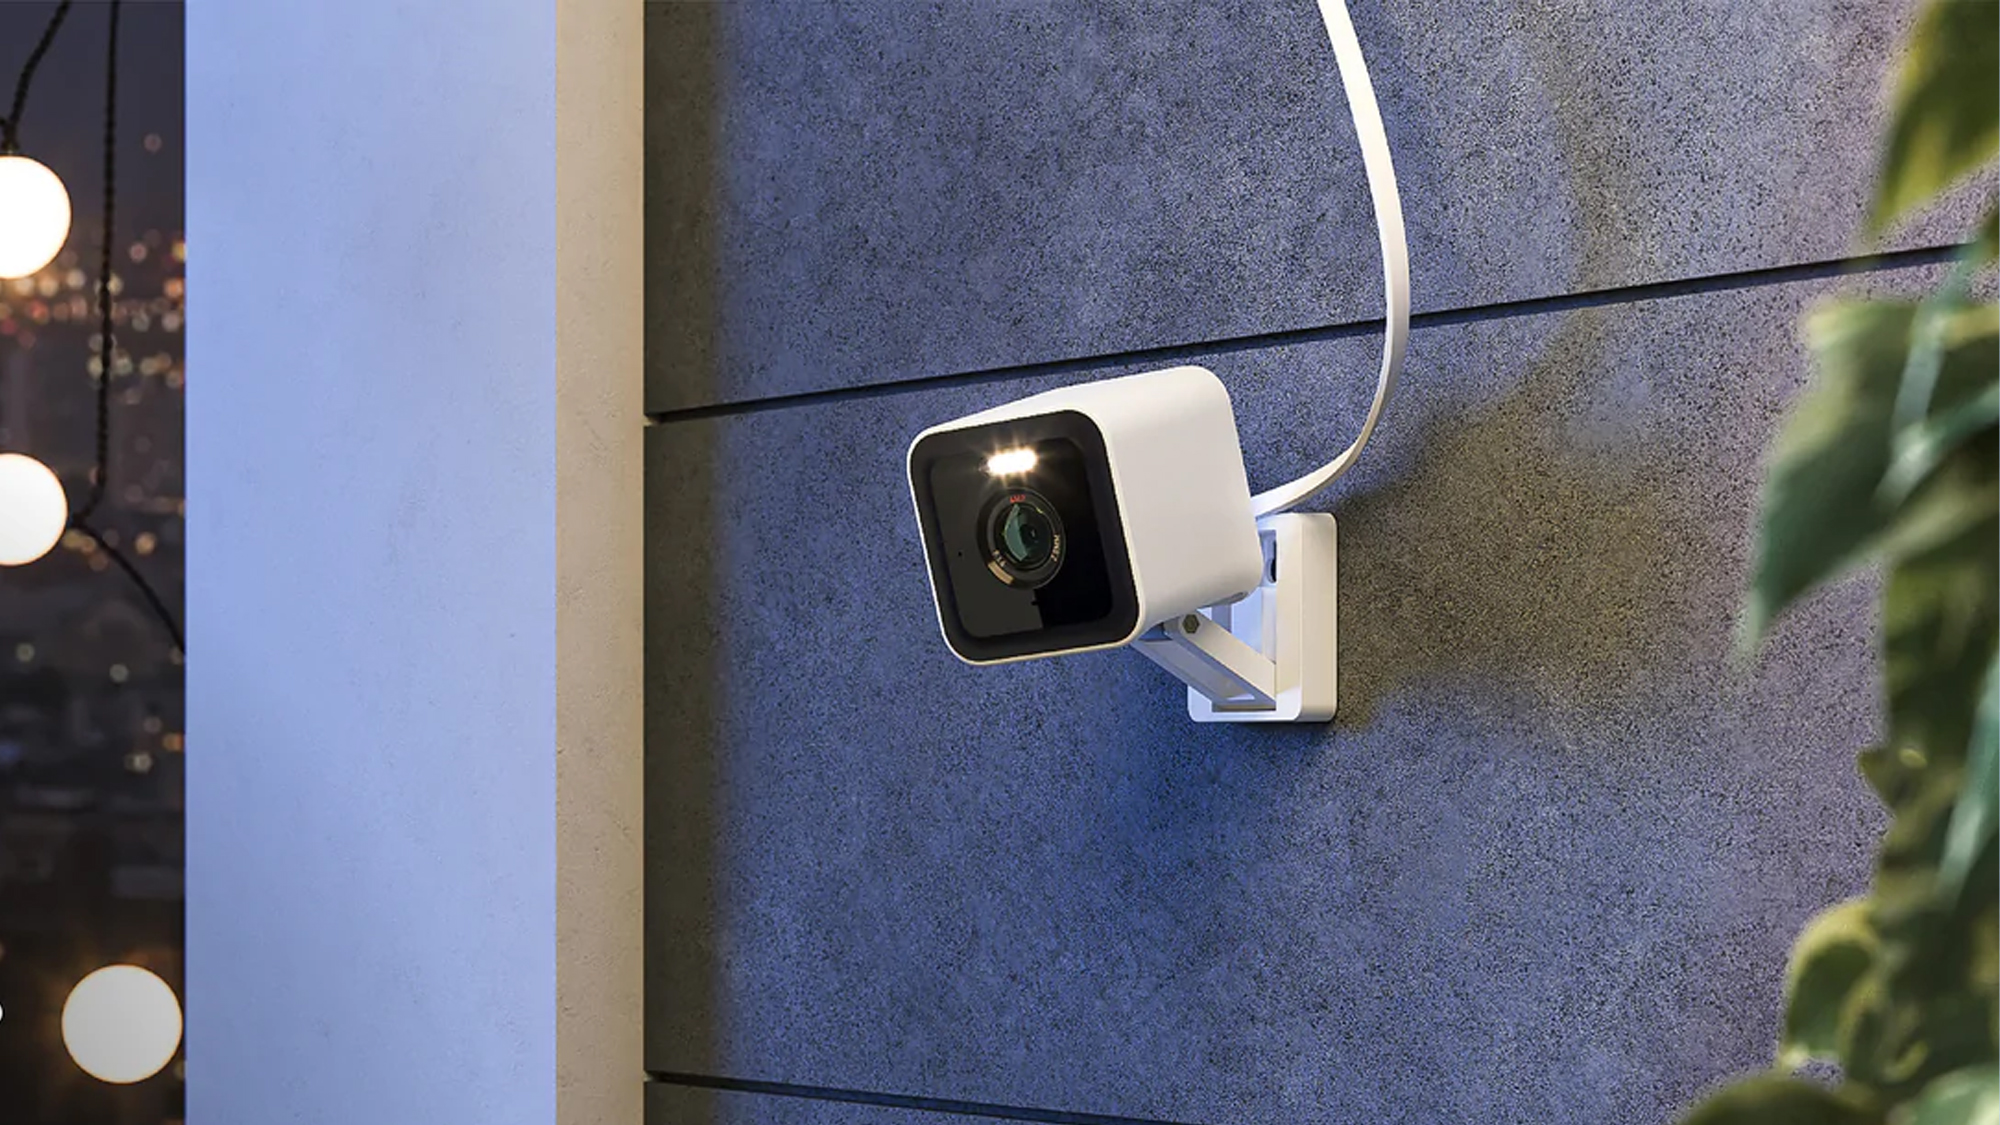 knocks up to 30 percent off Blink home security cameras